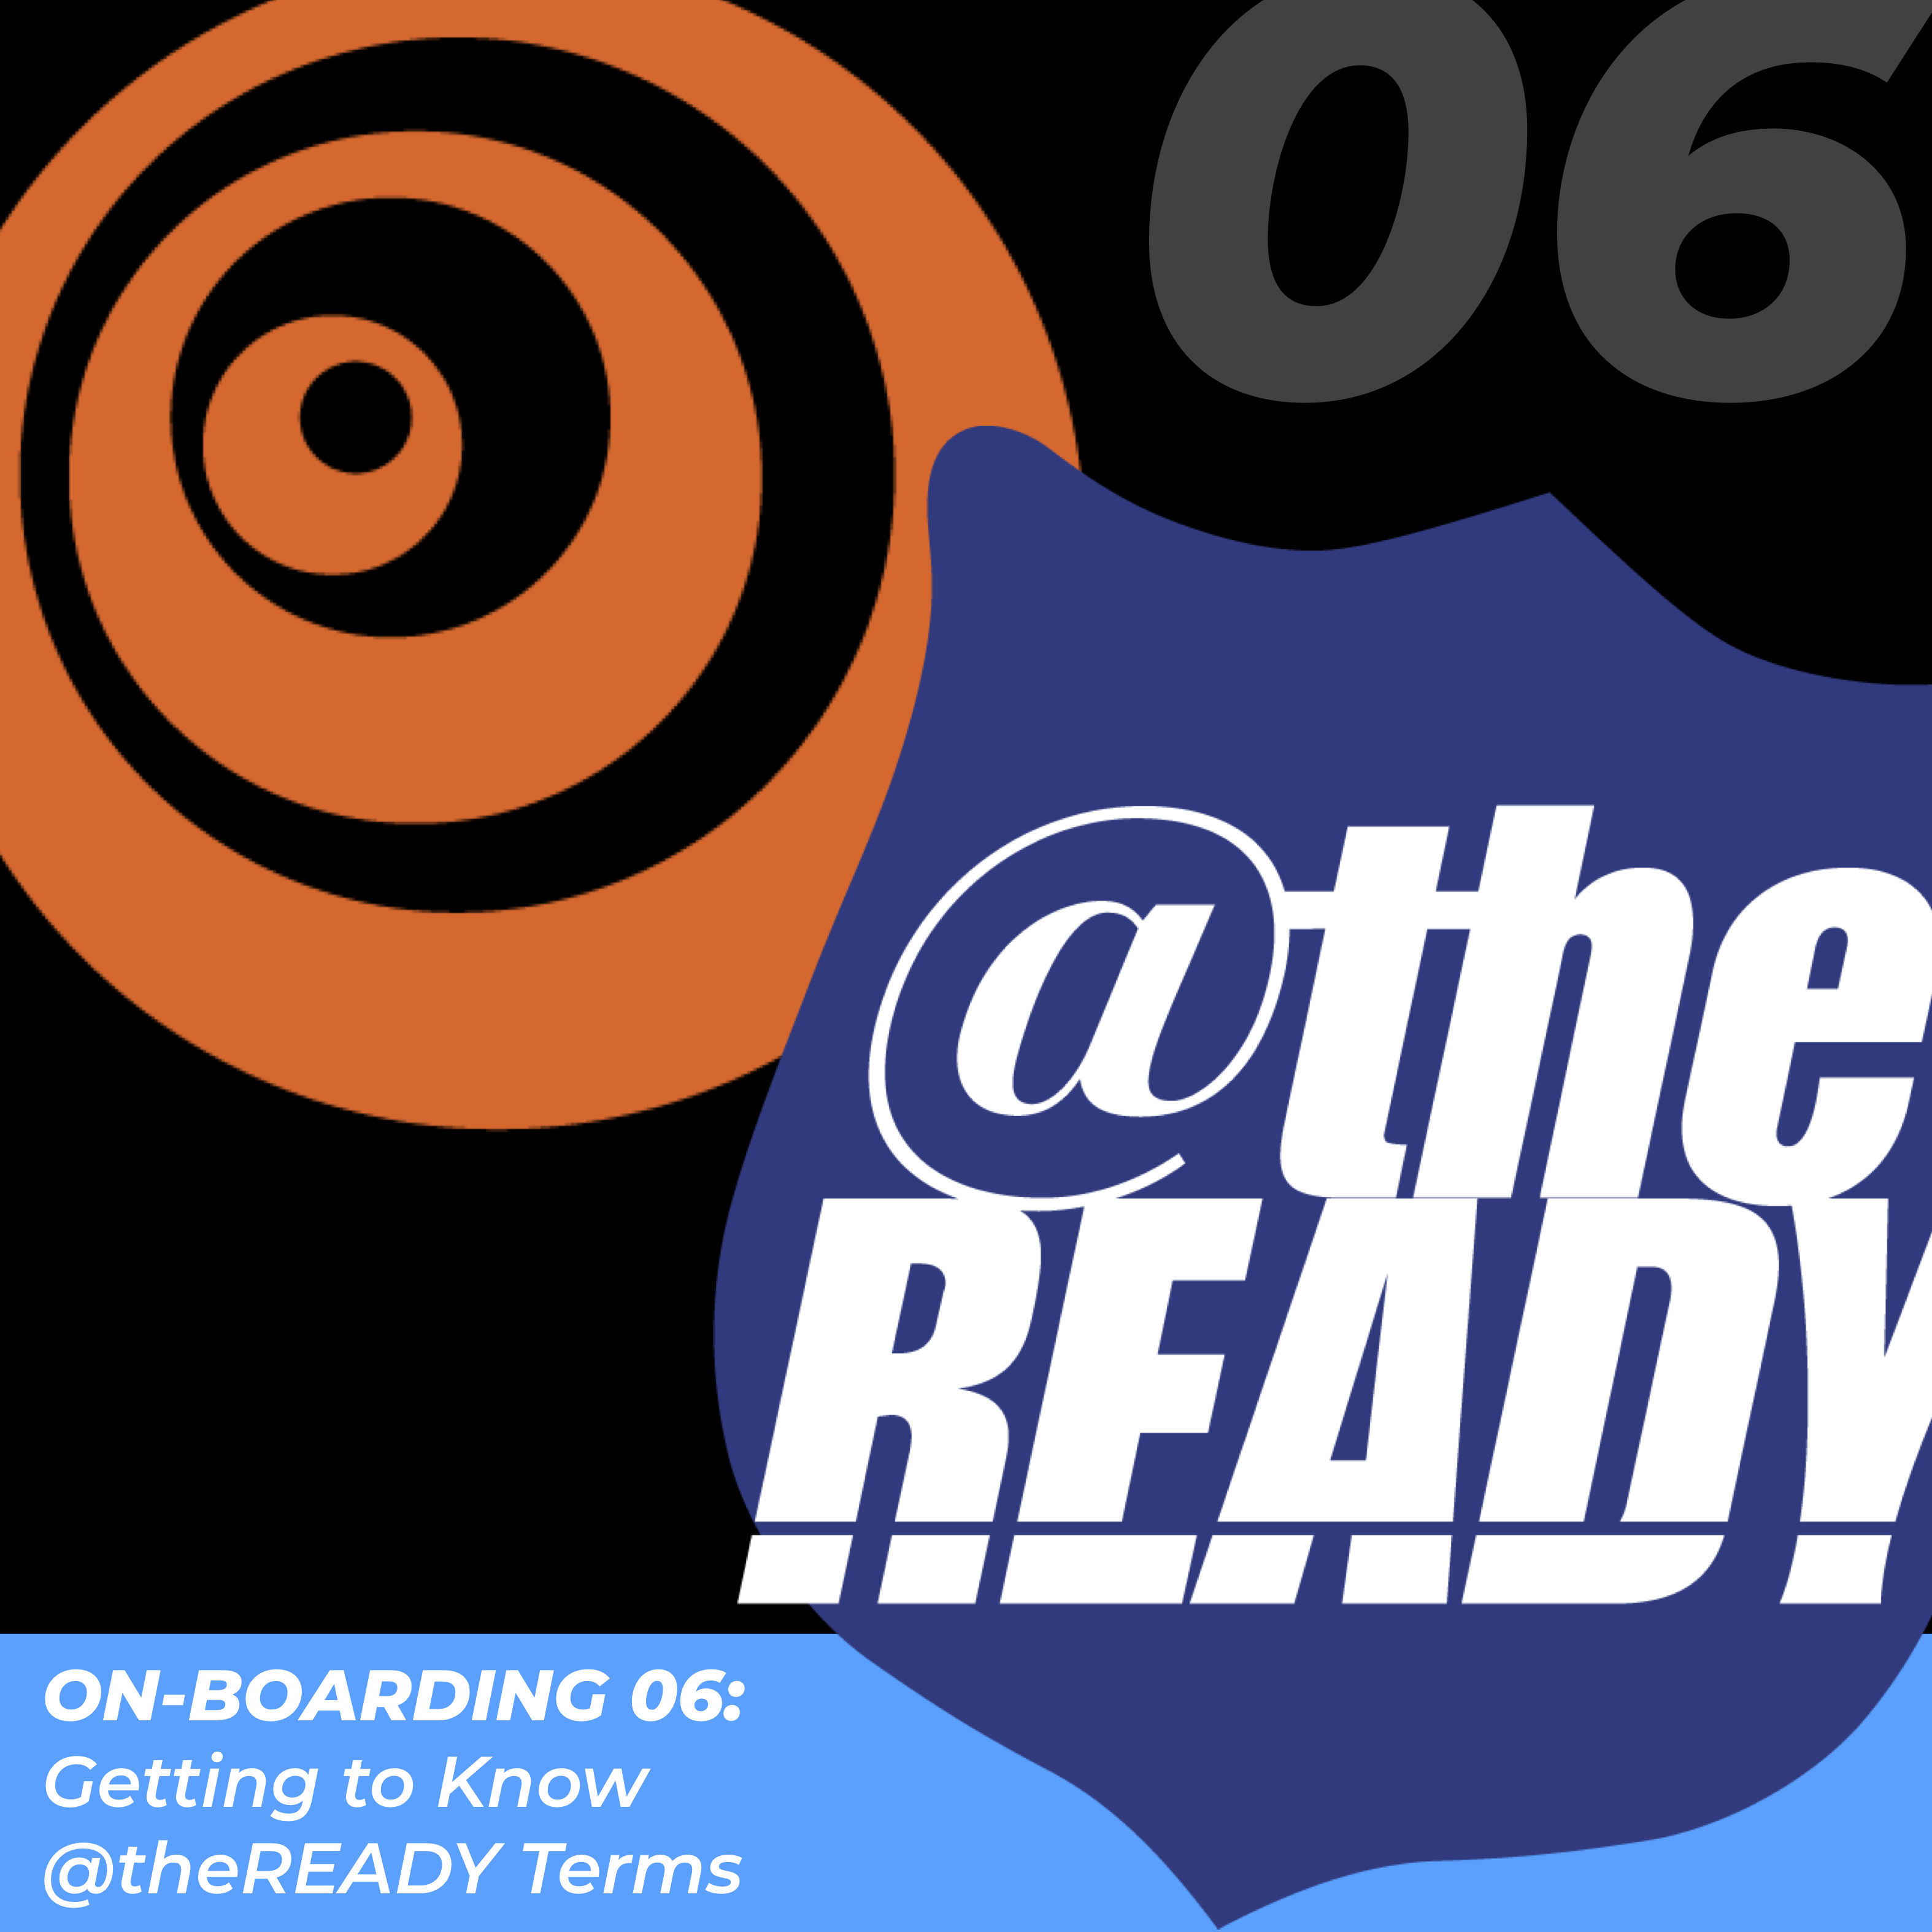 Click here for On-boarding 06: Getting to know @theReady terms.